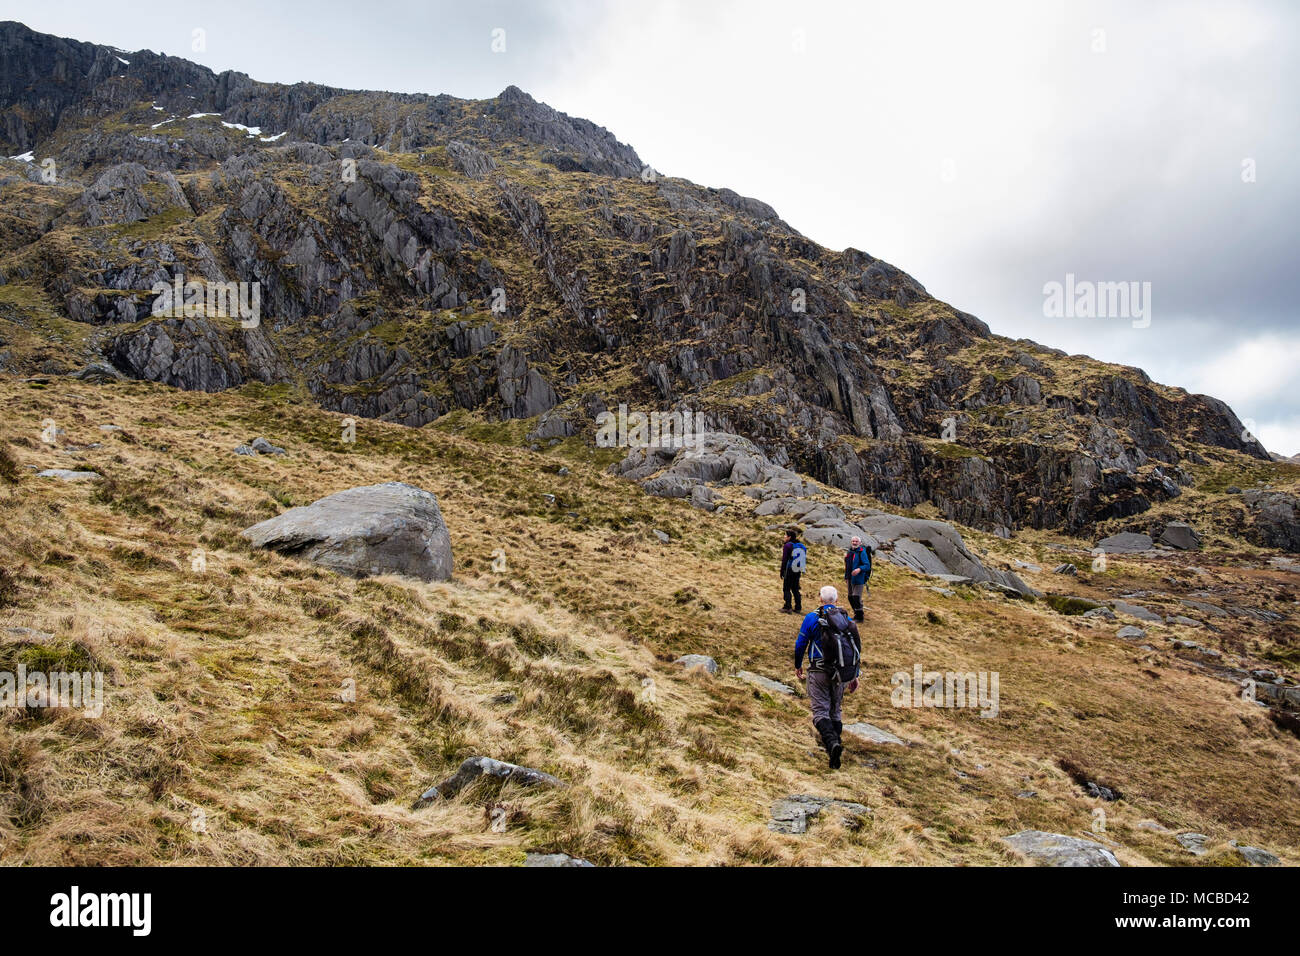 Hikers in Nameles Cwm / Cneifion hiking to start of Seniors Ridge route to Glyder Fawr in mountains of Snowdonia National Park. Ogwen Wales UK Britain Stock Photo